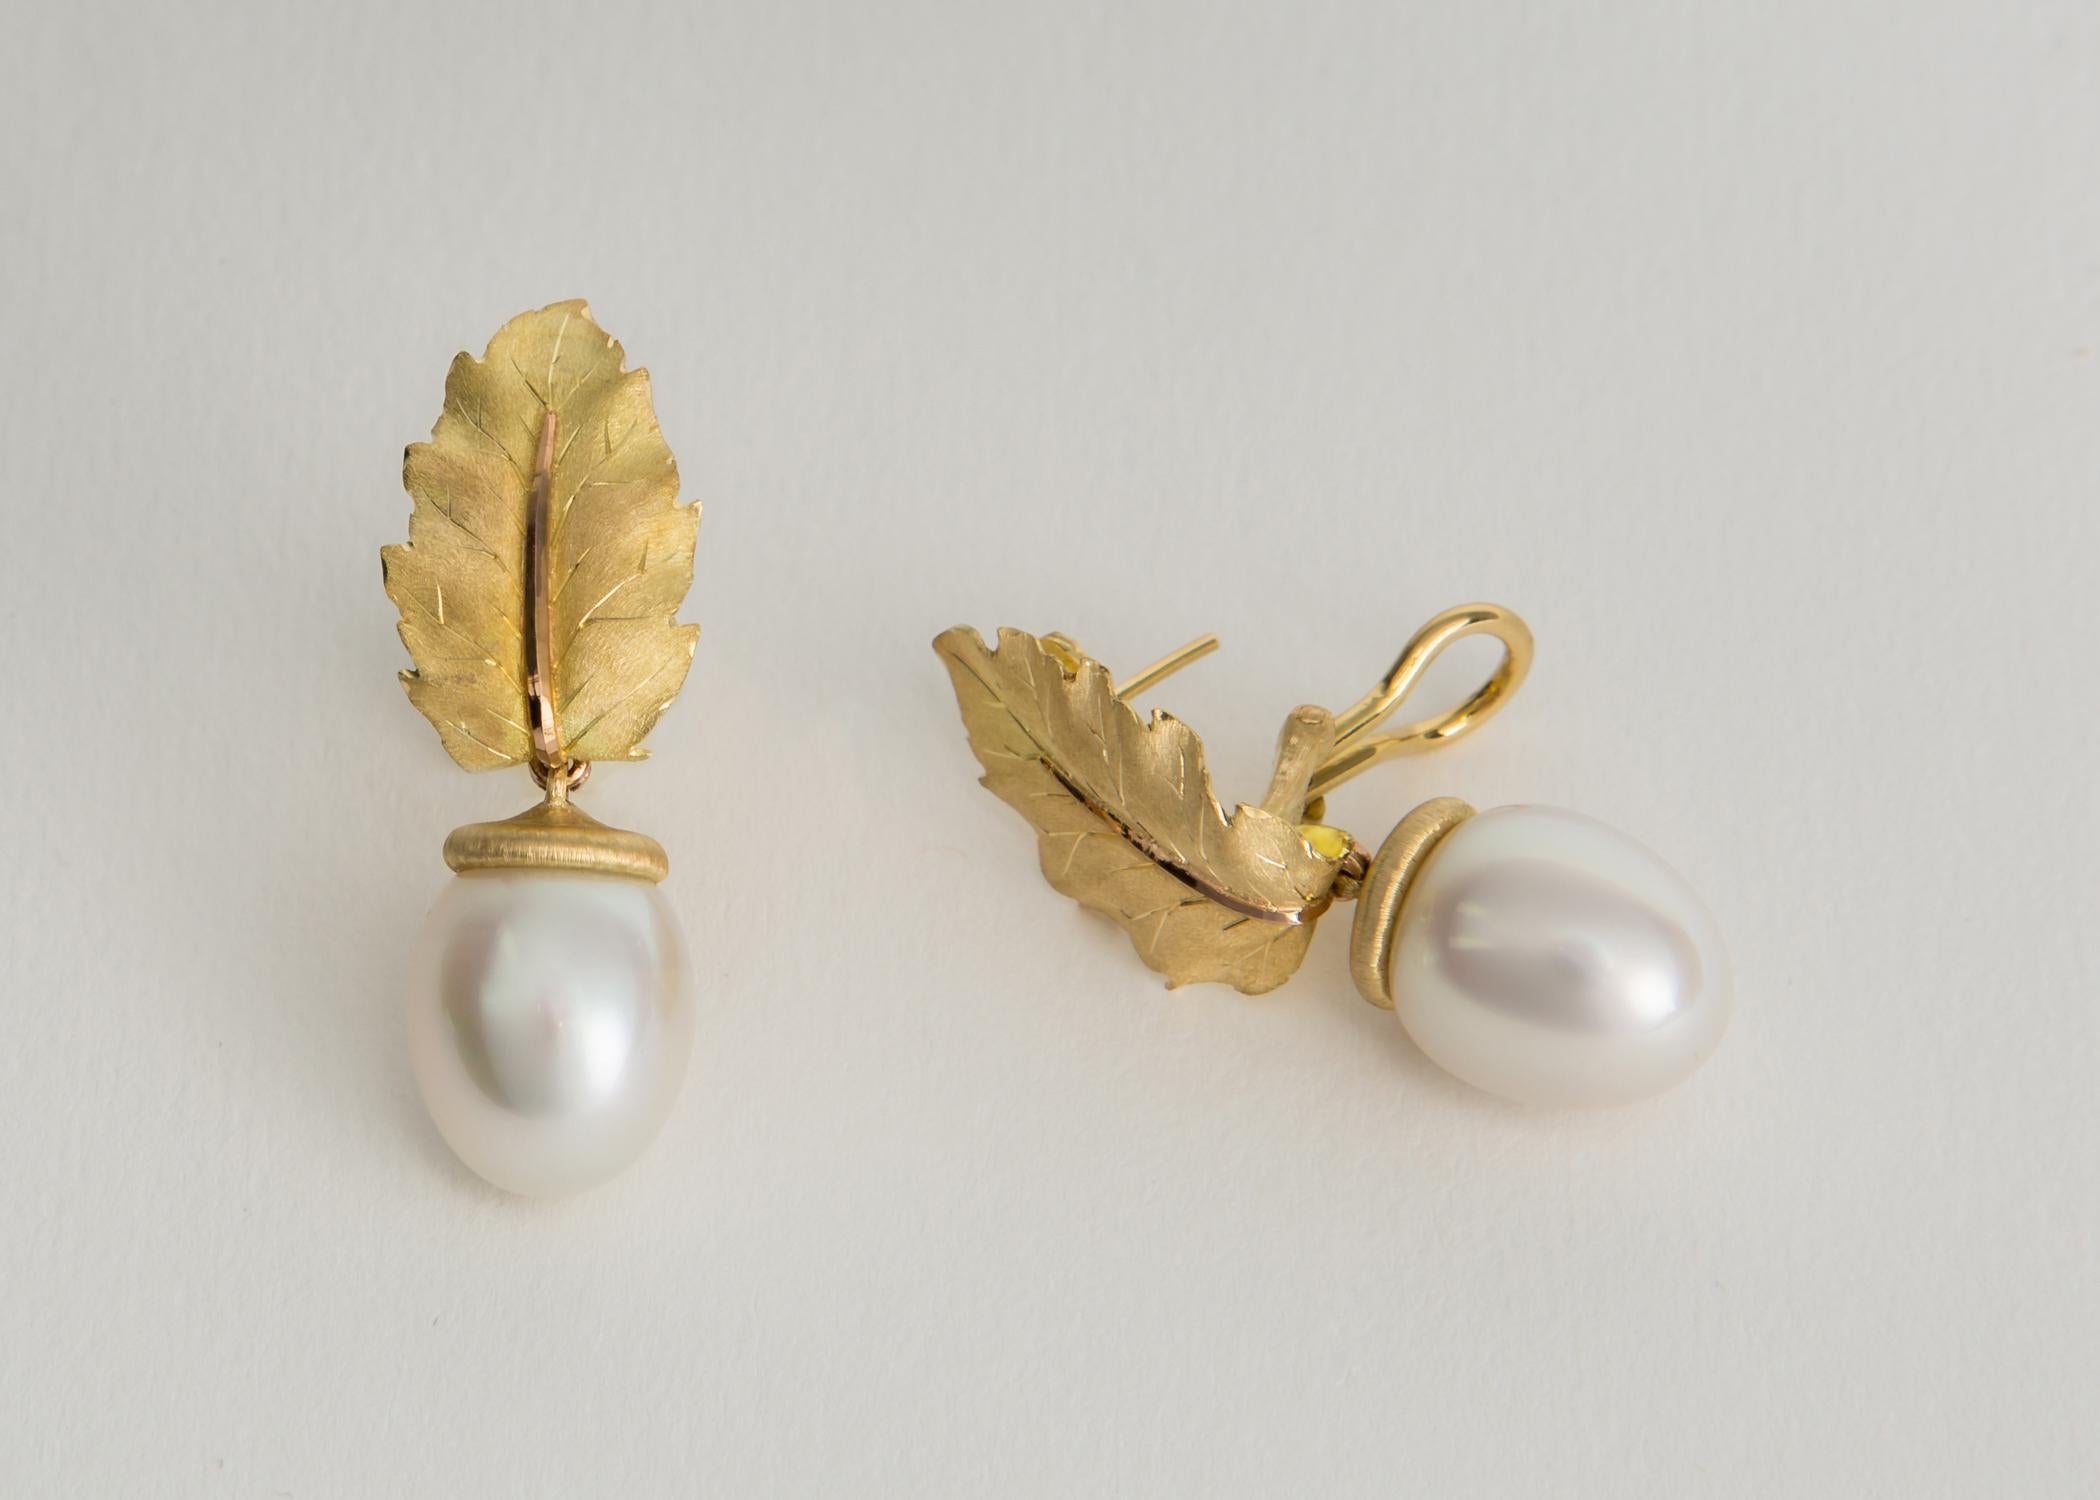 Buccellati's classic leaf motif earrings featuring an exceptional pair of south sea pearls 15.0 x 12.4mm 1 5/8 inches in length. Vintage, Classic, Chic !!!